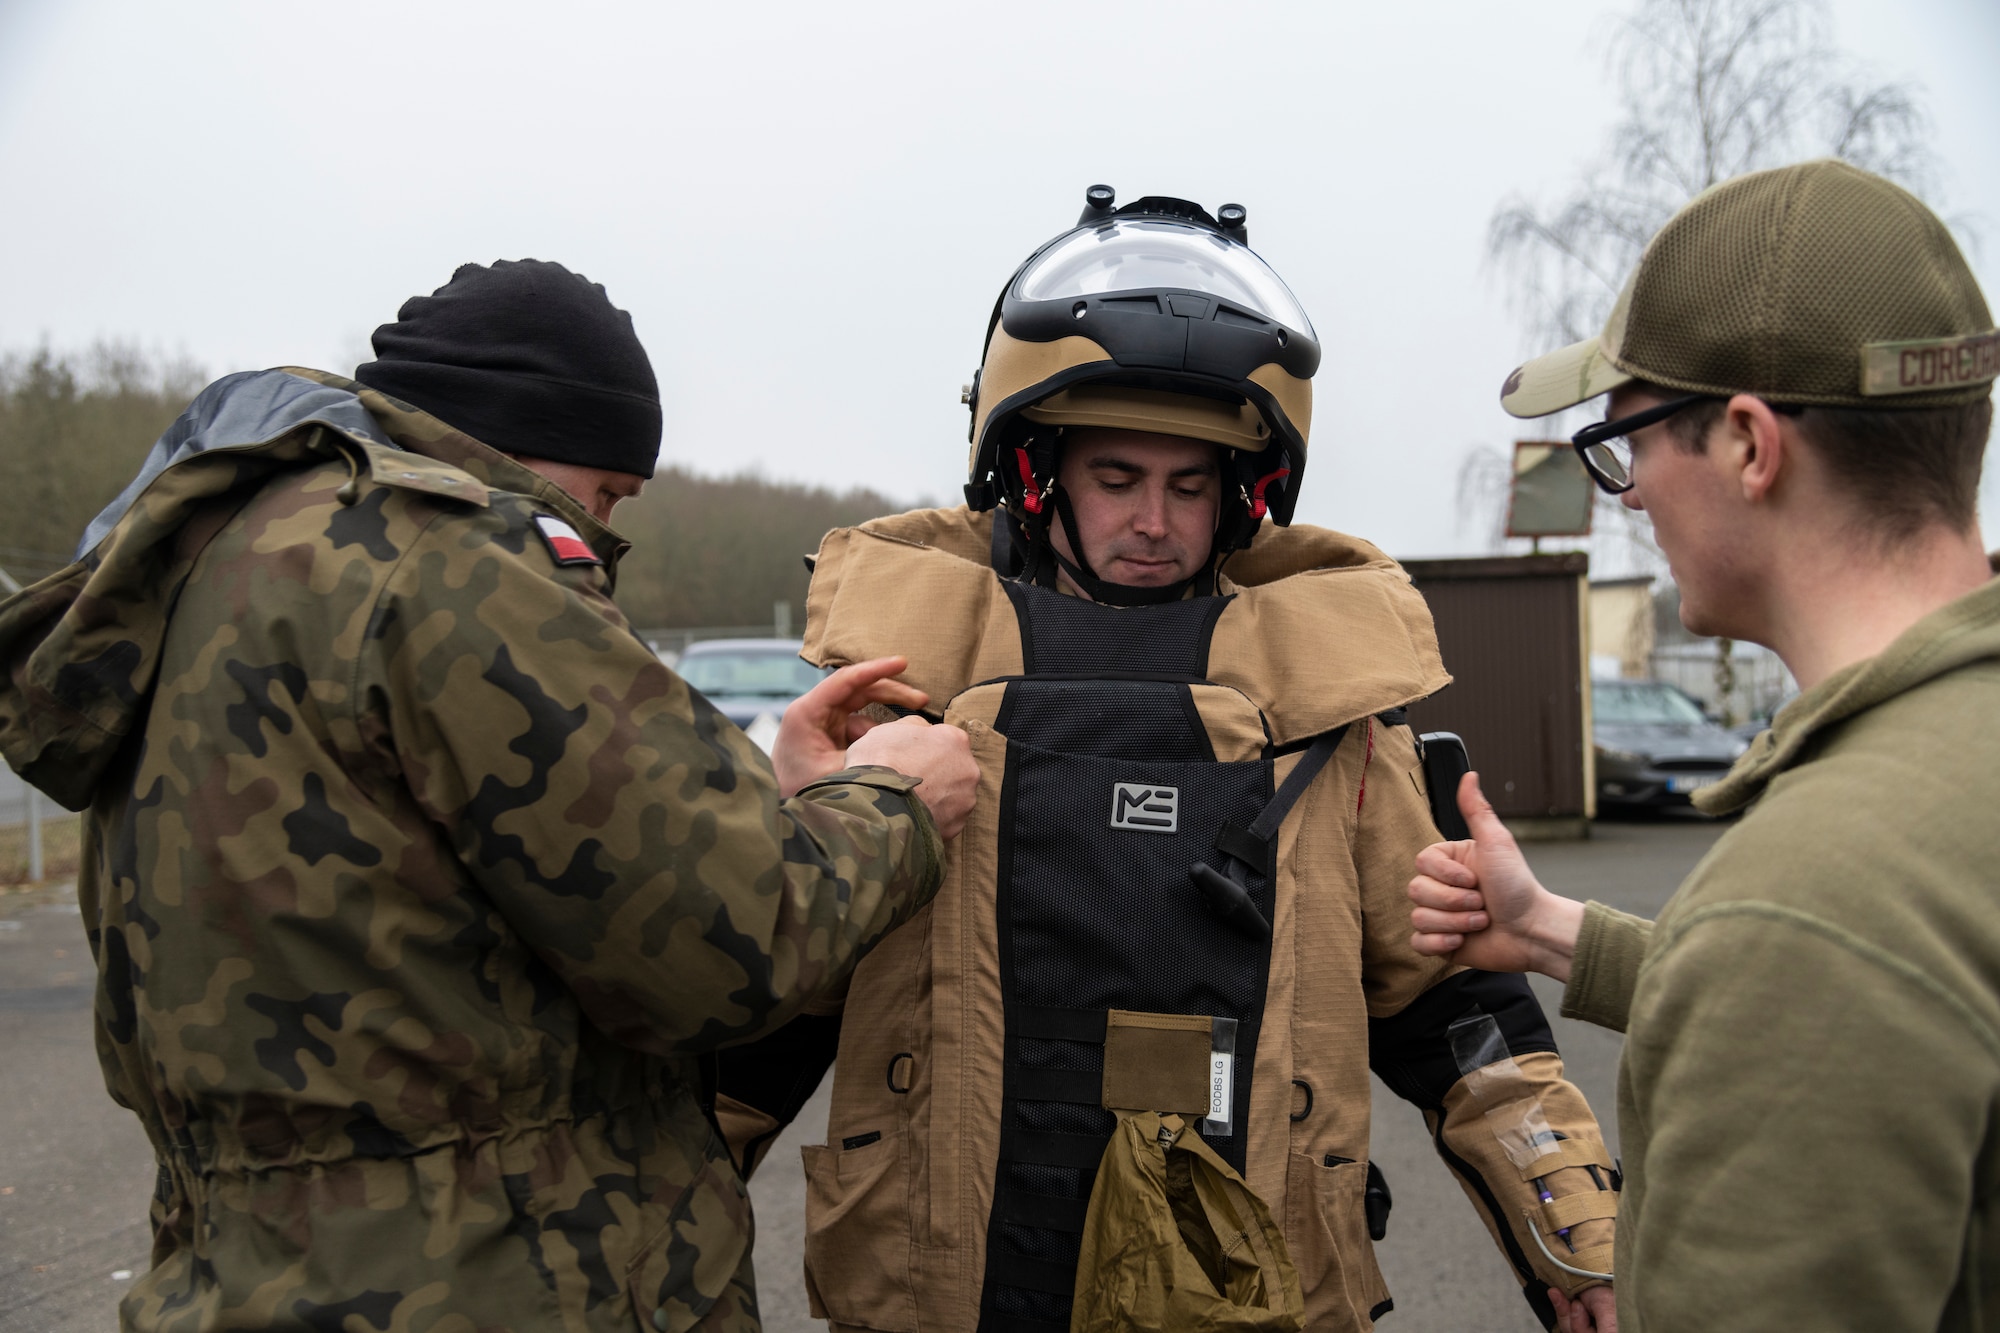 A U.S. Air Force Explosive Ordnance Disposal technician, assigned to the 52nd Fighter Wing Civil Engineer Squadron,  discuss tactics and benefits of the blast suit with a Polish Improvised Explosive Device unit member during the ongoing familiarization and interoperability training at Spangdahlem Air Base, Dec. 9, 2021. These NATO partners routinely train together to strengthen the relationship between the Polish IED unit and 52nd FW EOD team and continue to improve each other’s tactics and procedures. (U.S. Air Force photo by Senior Airman Ali Stewart)